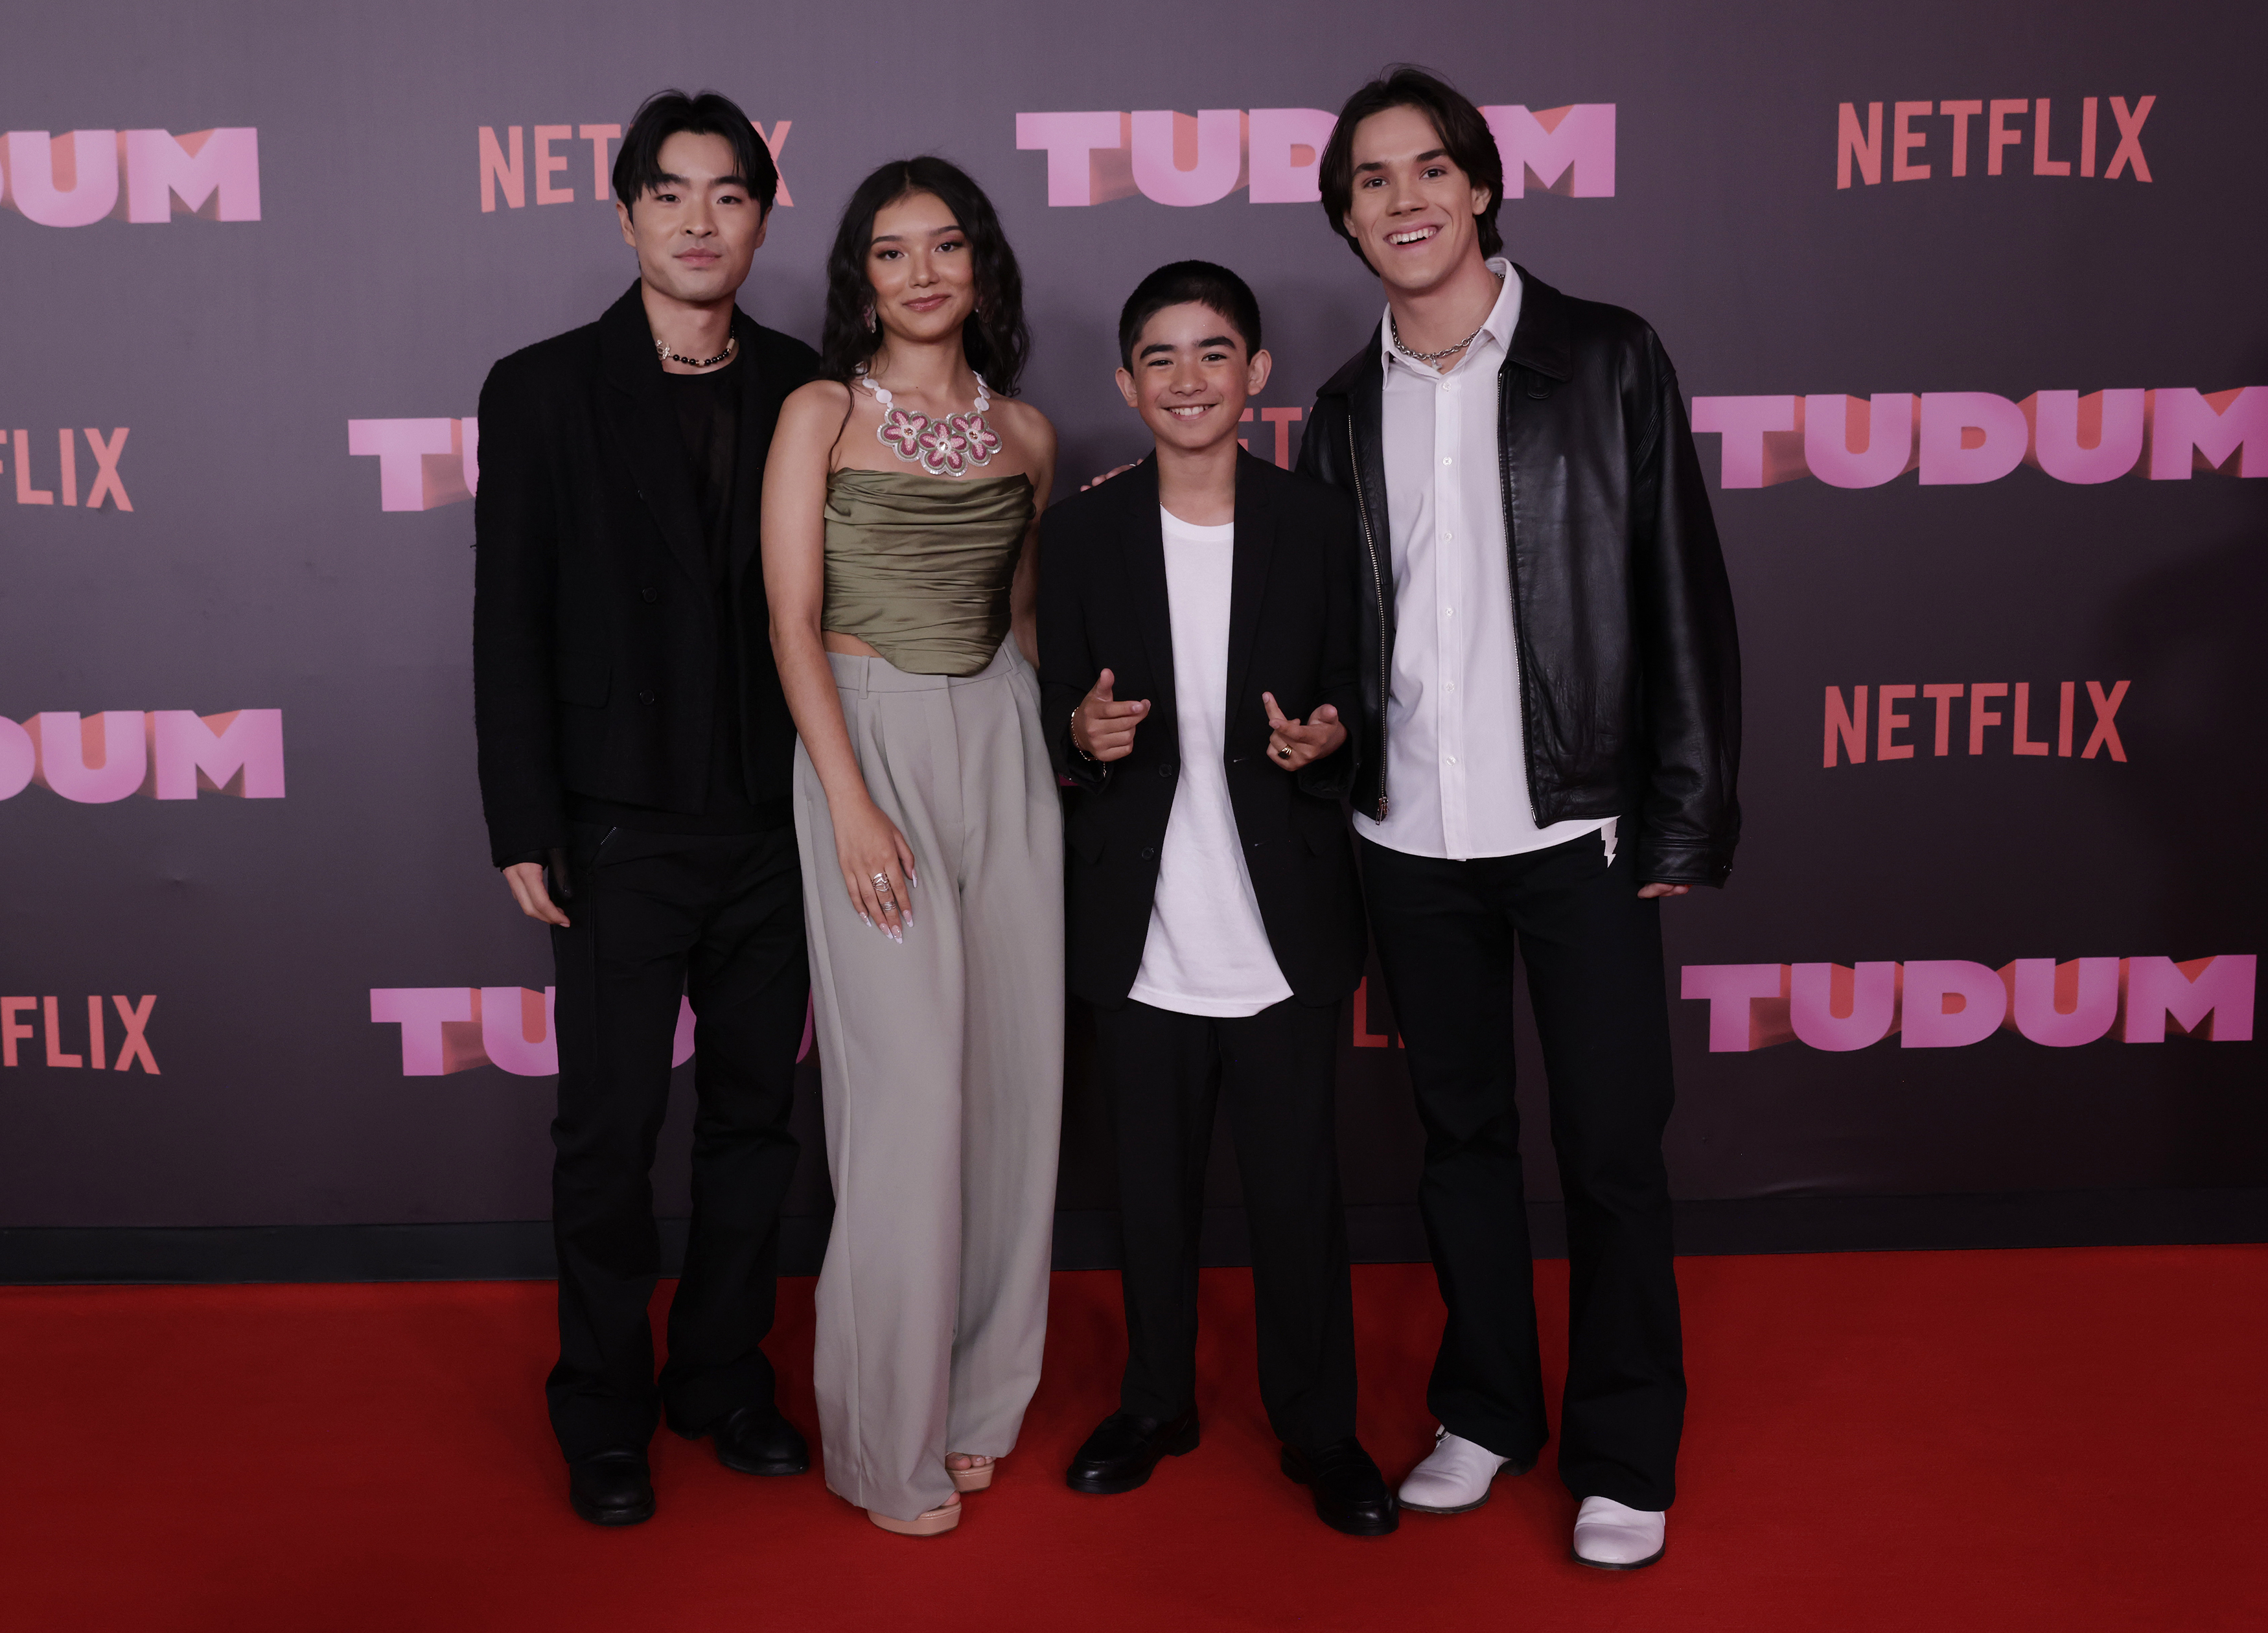 Four cast members posing at a Netflix event, two in suits, one in a dress, one in casual wear